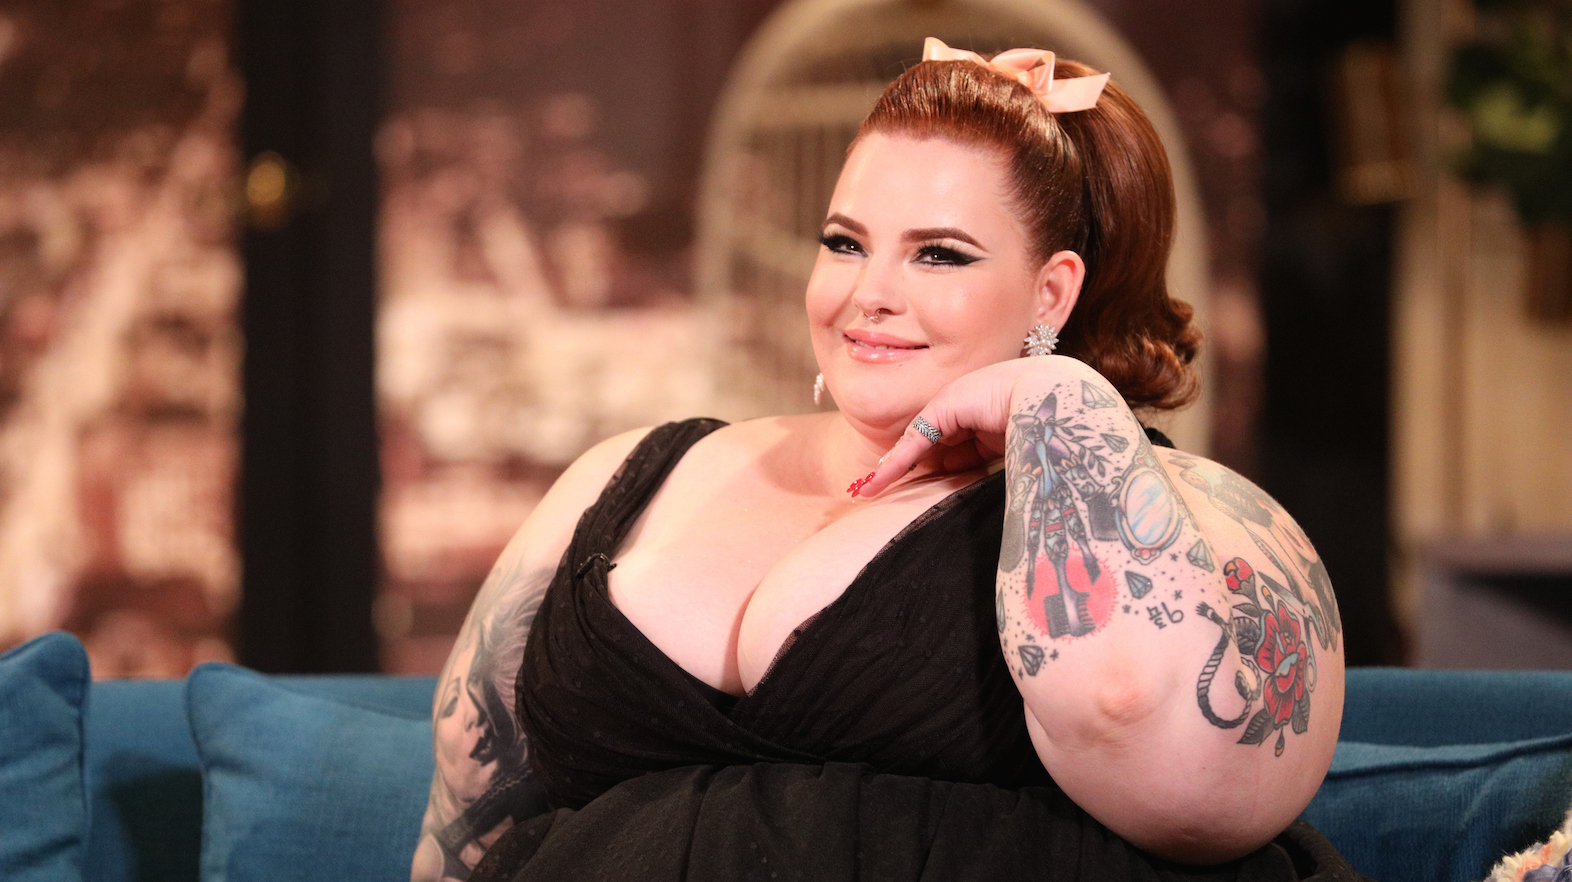 Tess Holliday Plastic Surgery: What Procedures Has the Model Done?